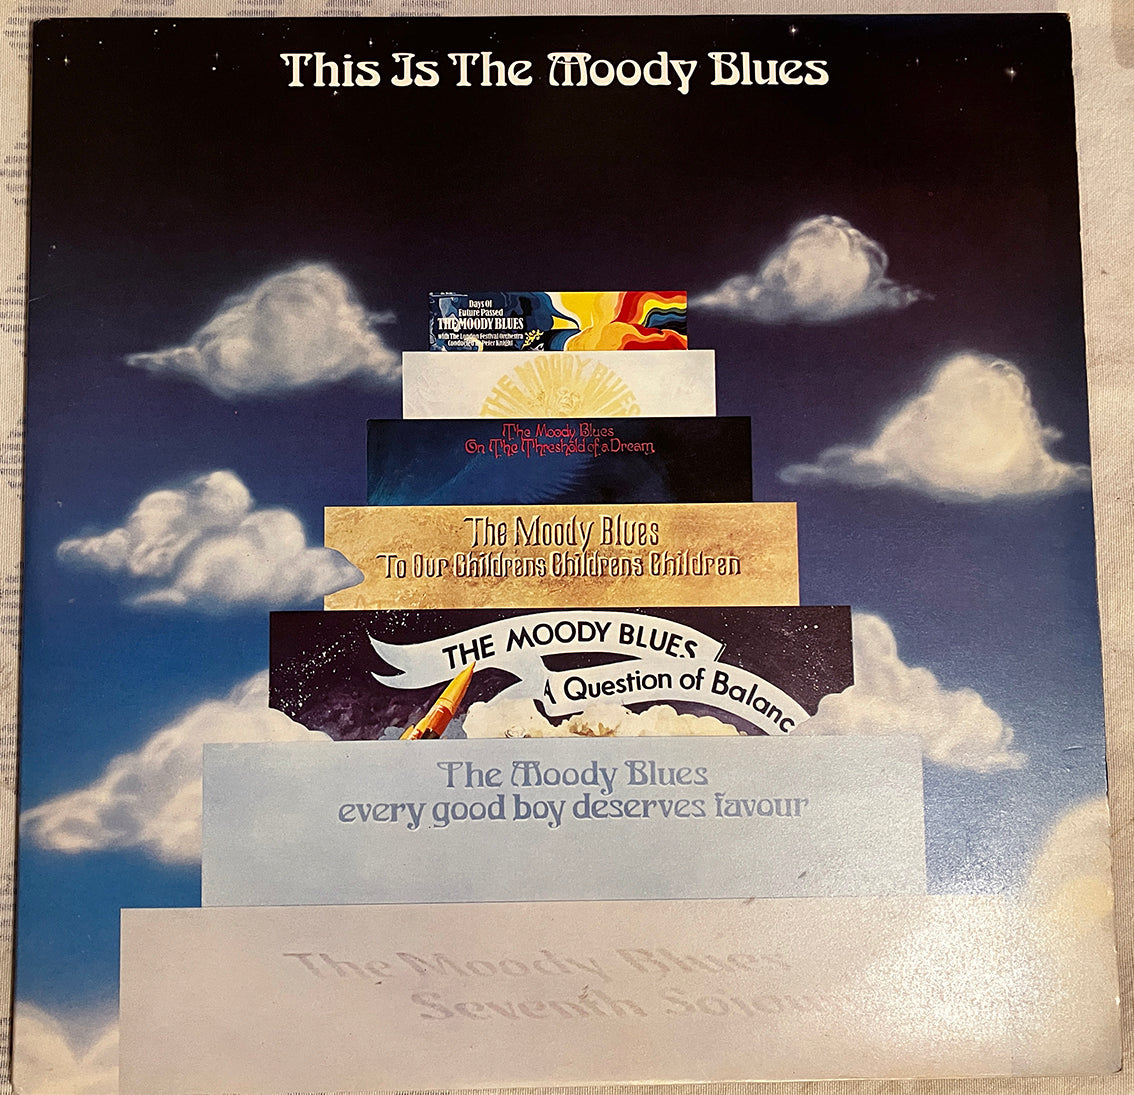 The Moody Blues - This Is The Moody Blues, UK1974, EX/EX